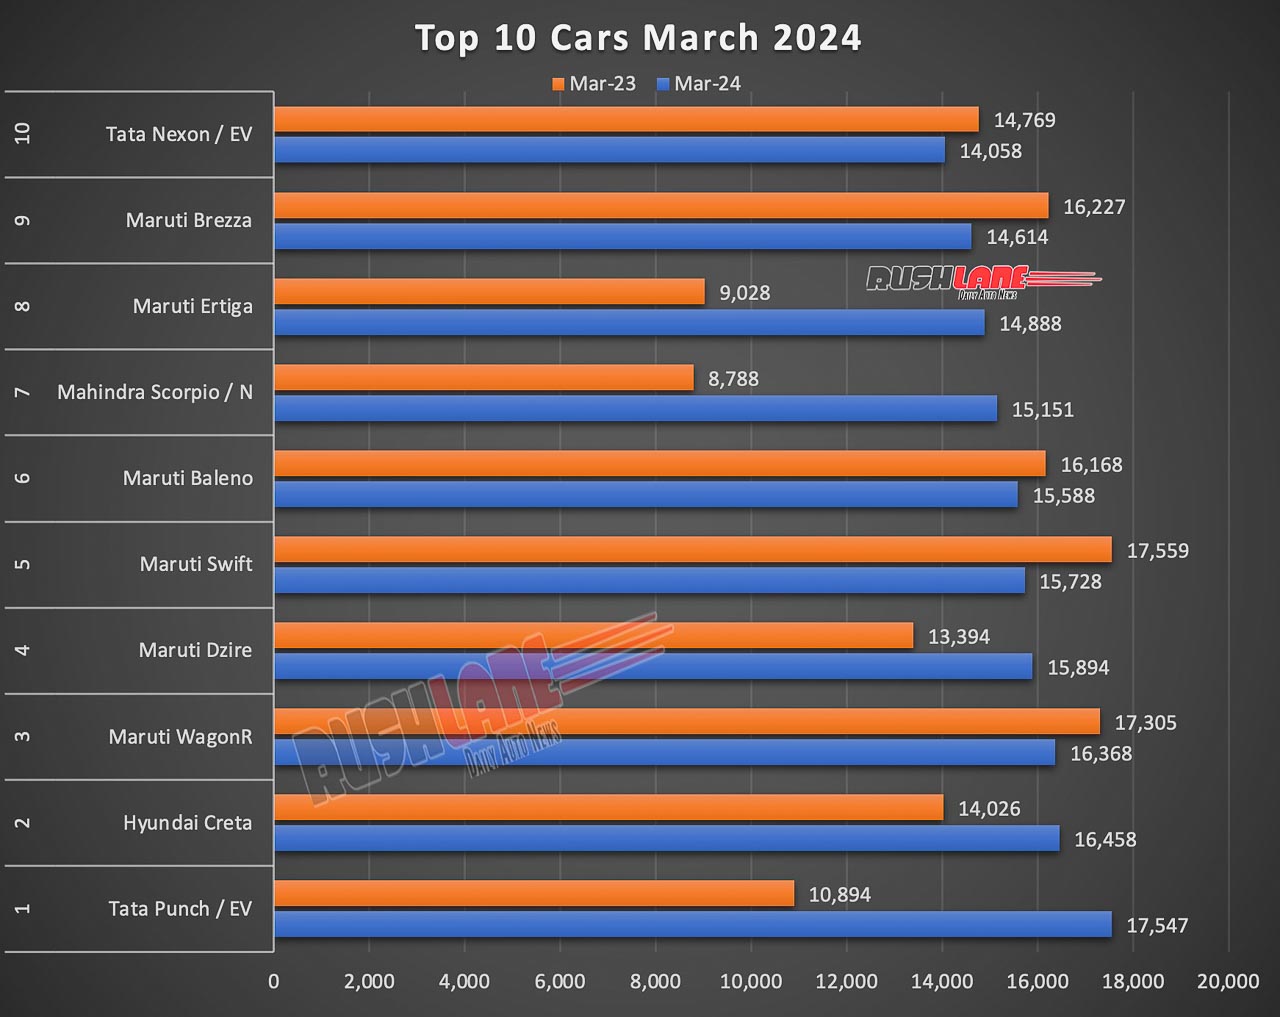 Top 10 Cars March 2024